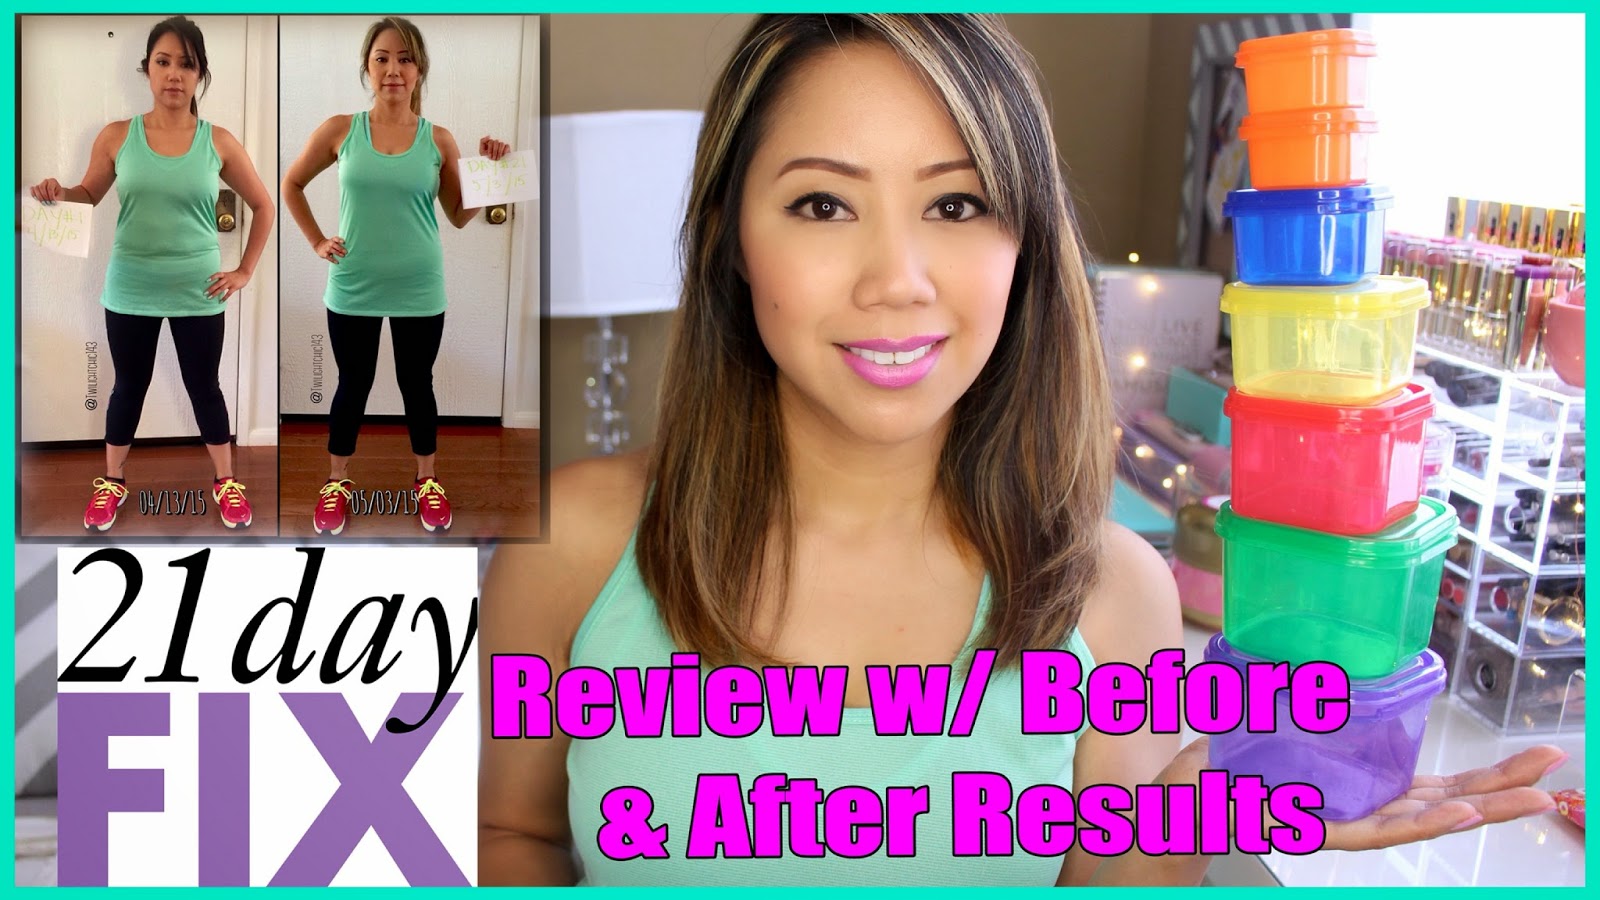 21 Day Fix Review w/Before & After Results | TwilightChic143 - Tin's